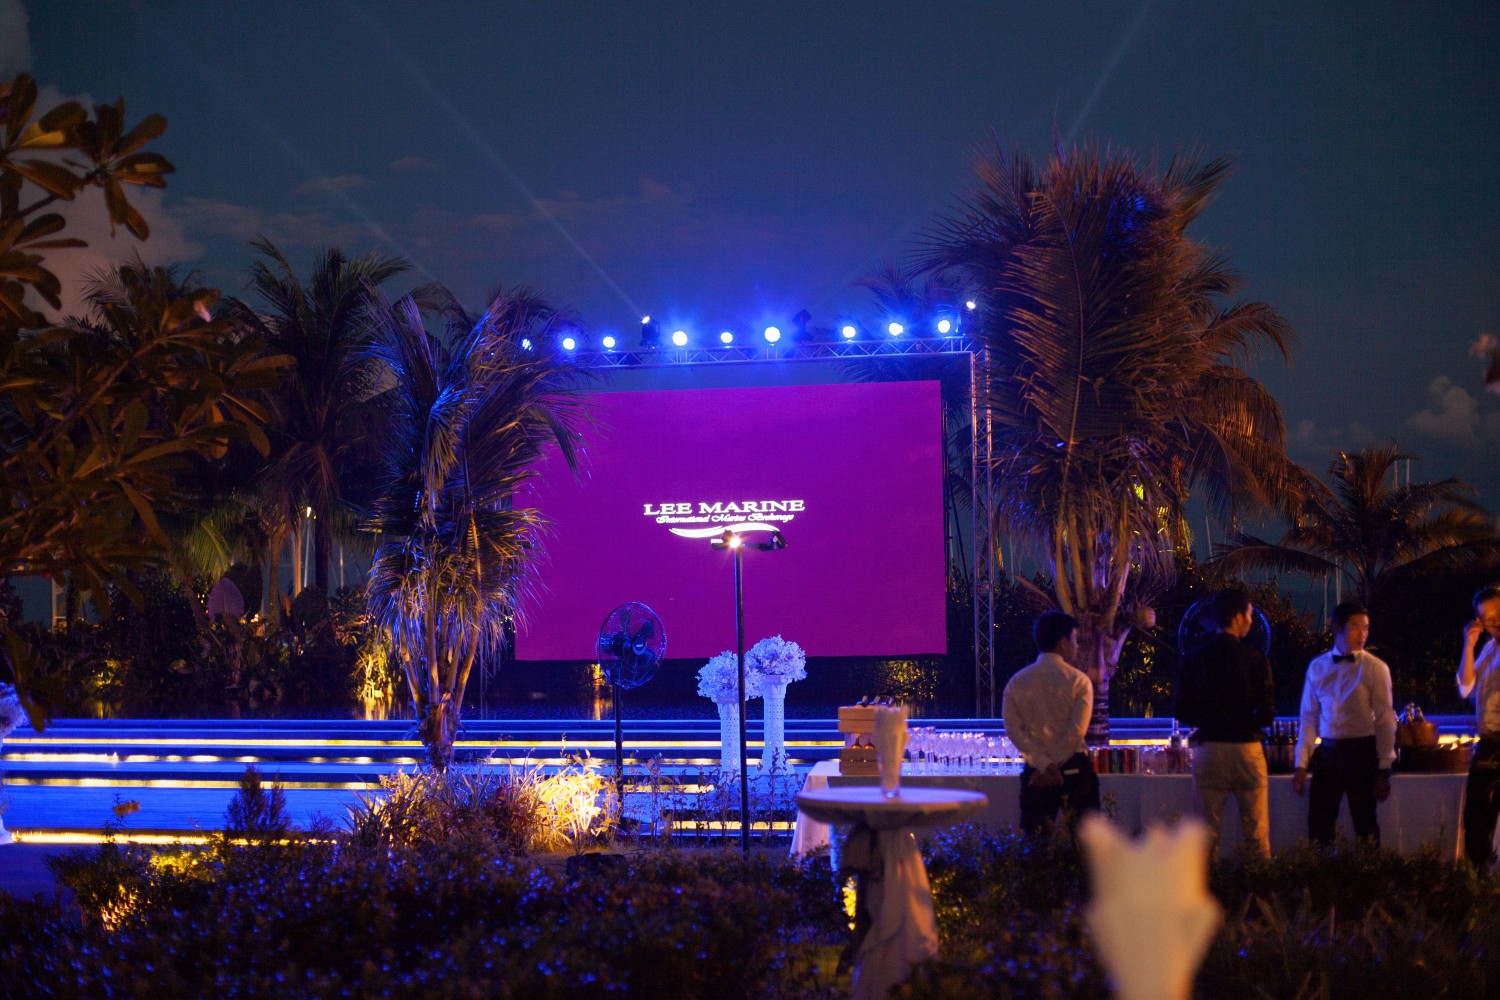 Lee Marine's spectacular poolside Party included a massive screen showing latest, hot yachts and local sea settings.